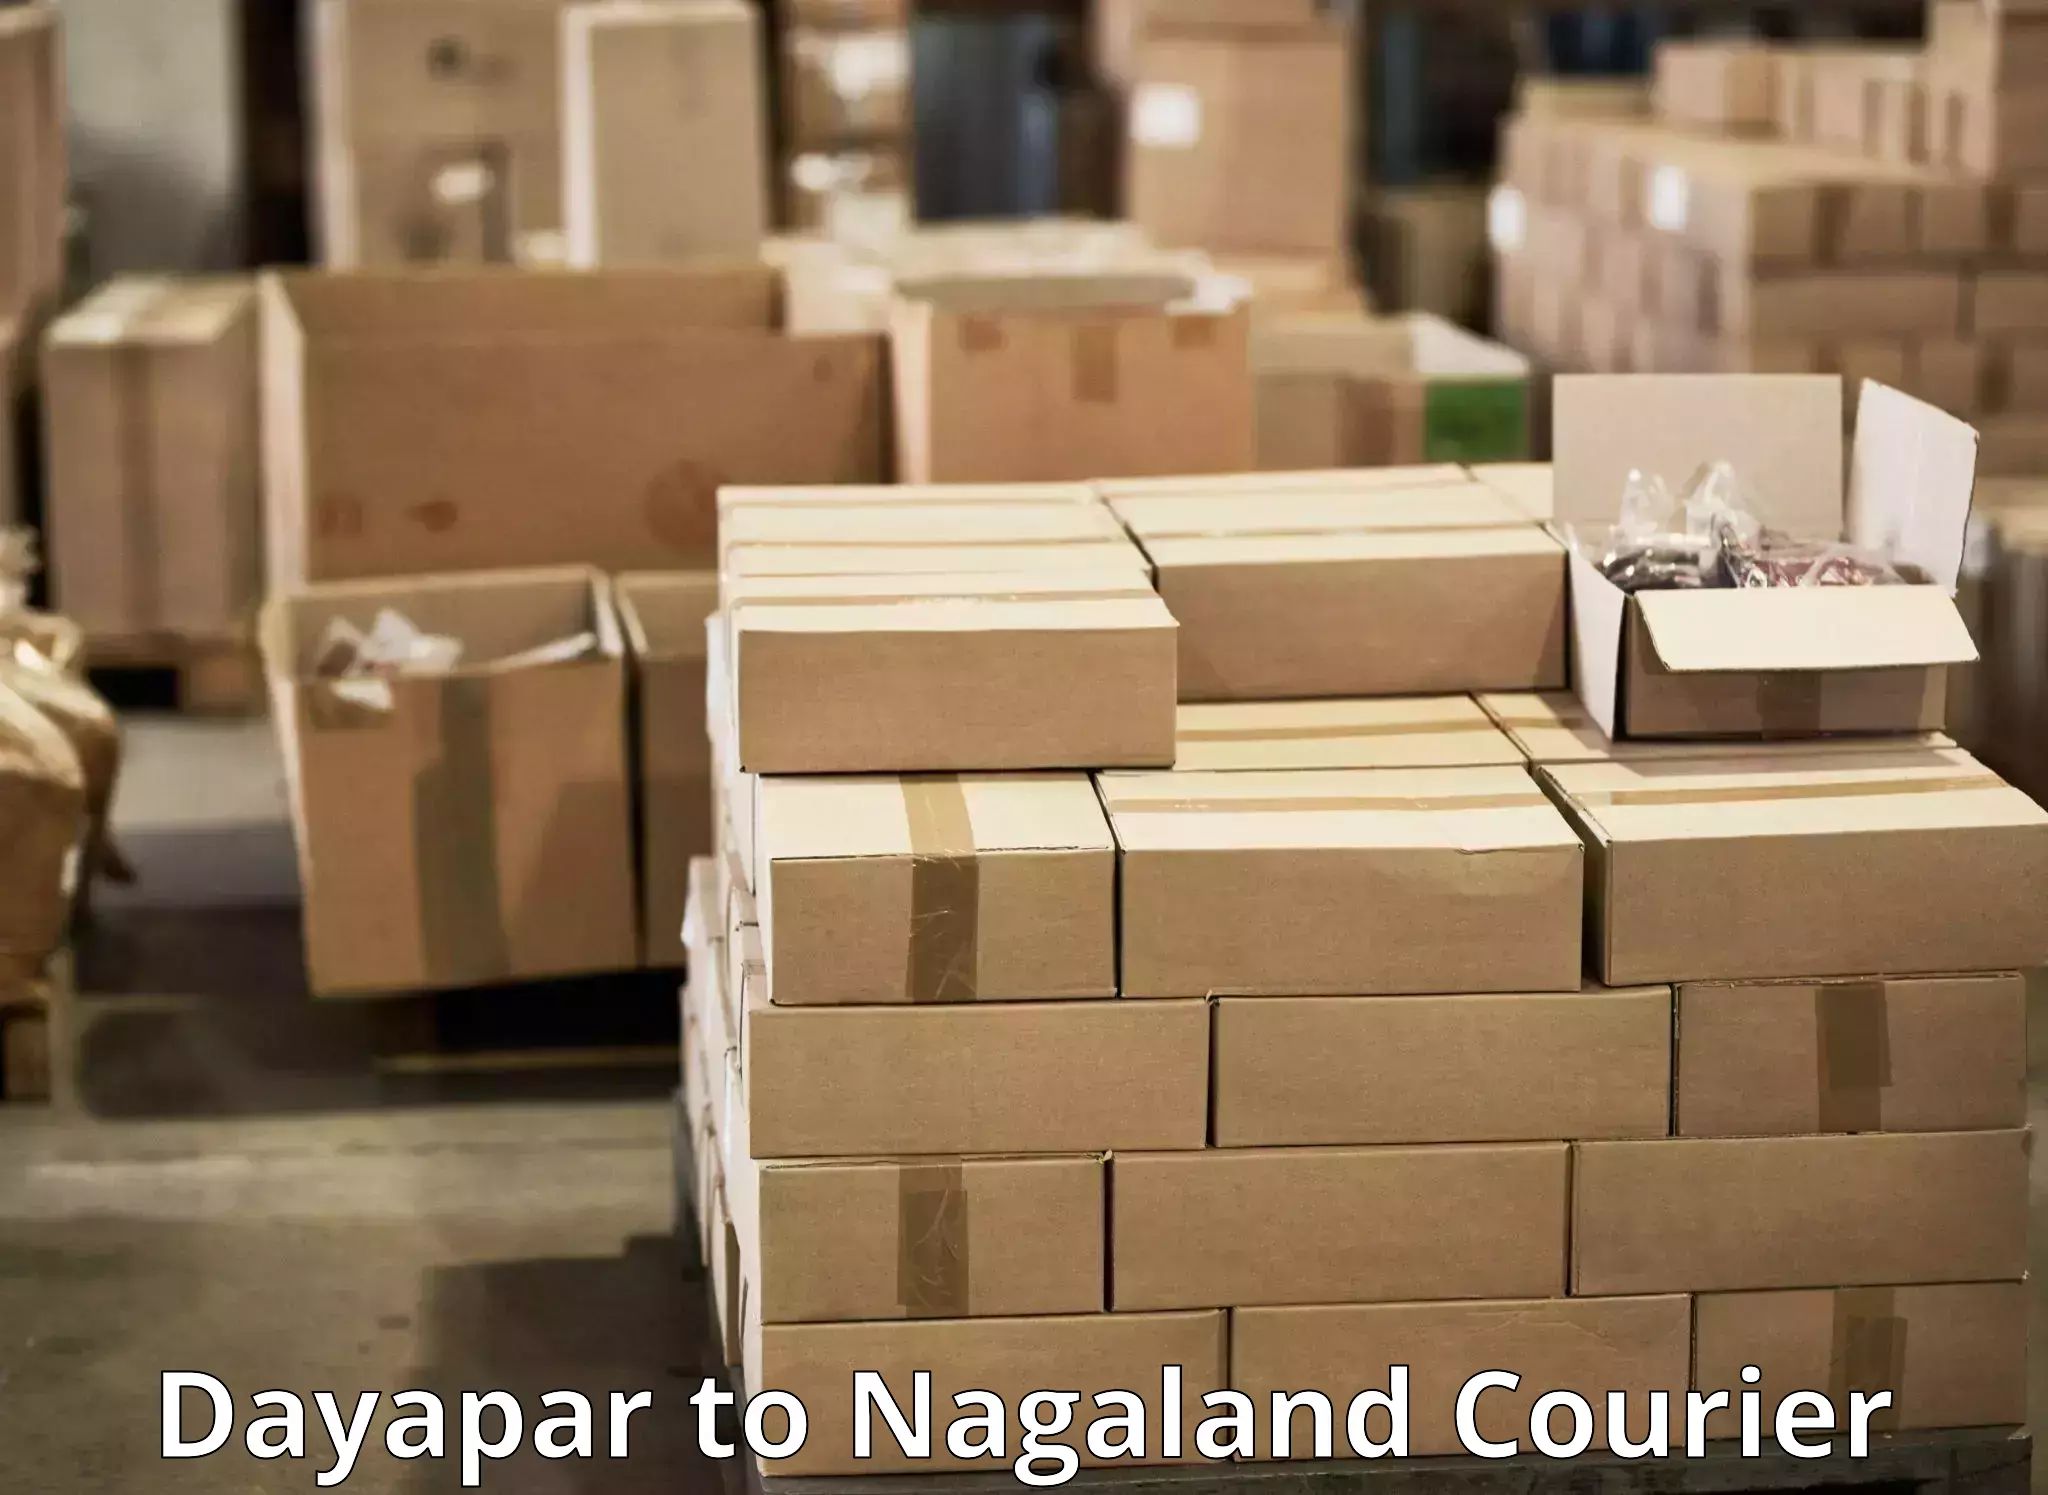 Same-day delivery solutions Dayapar to Nagaland